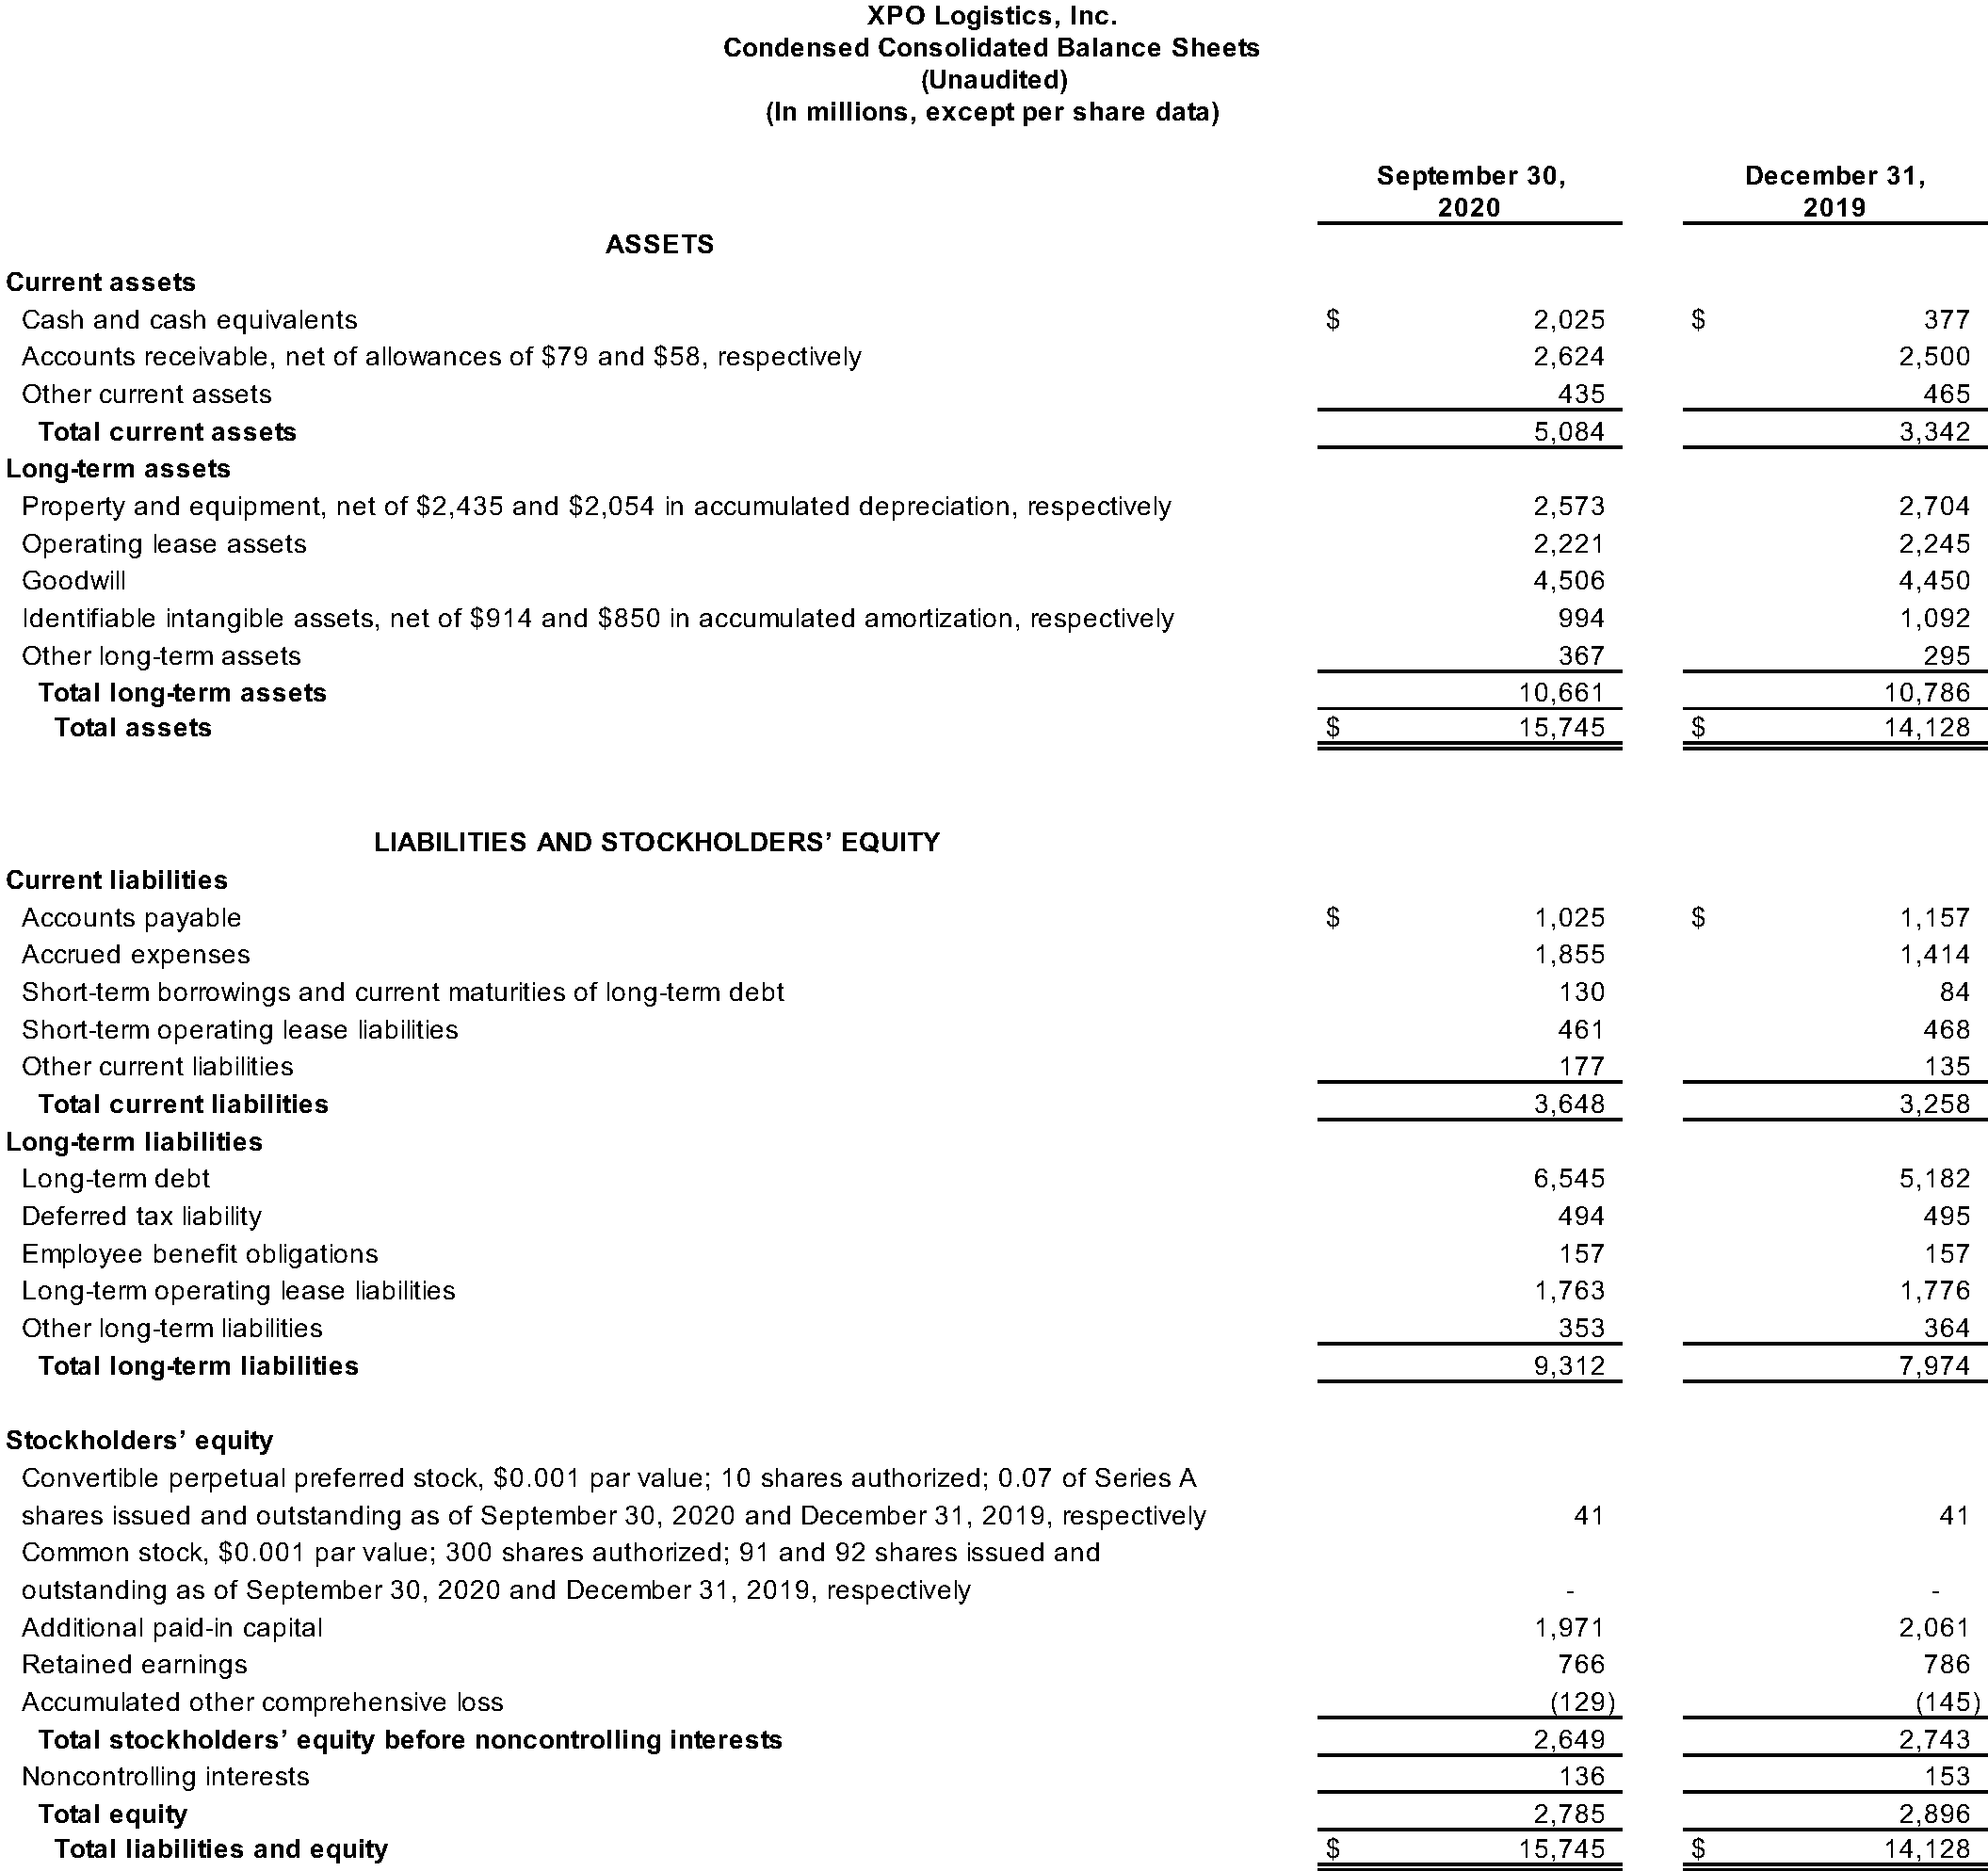 Condensed Consolidated Balance Sheets